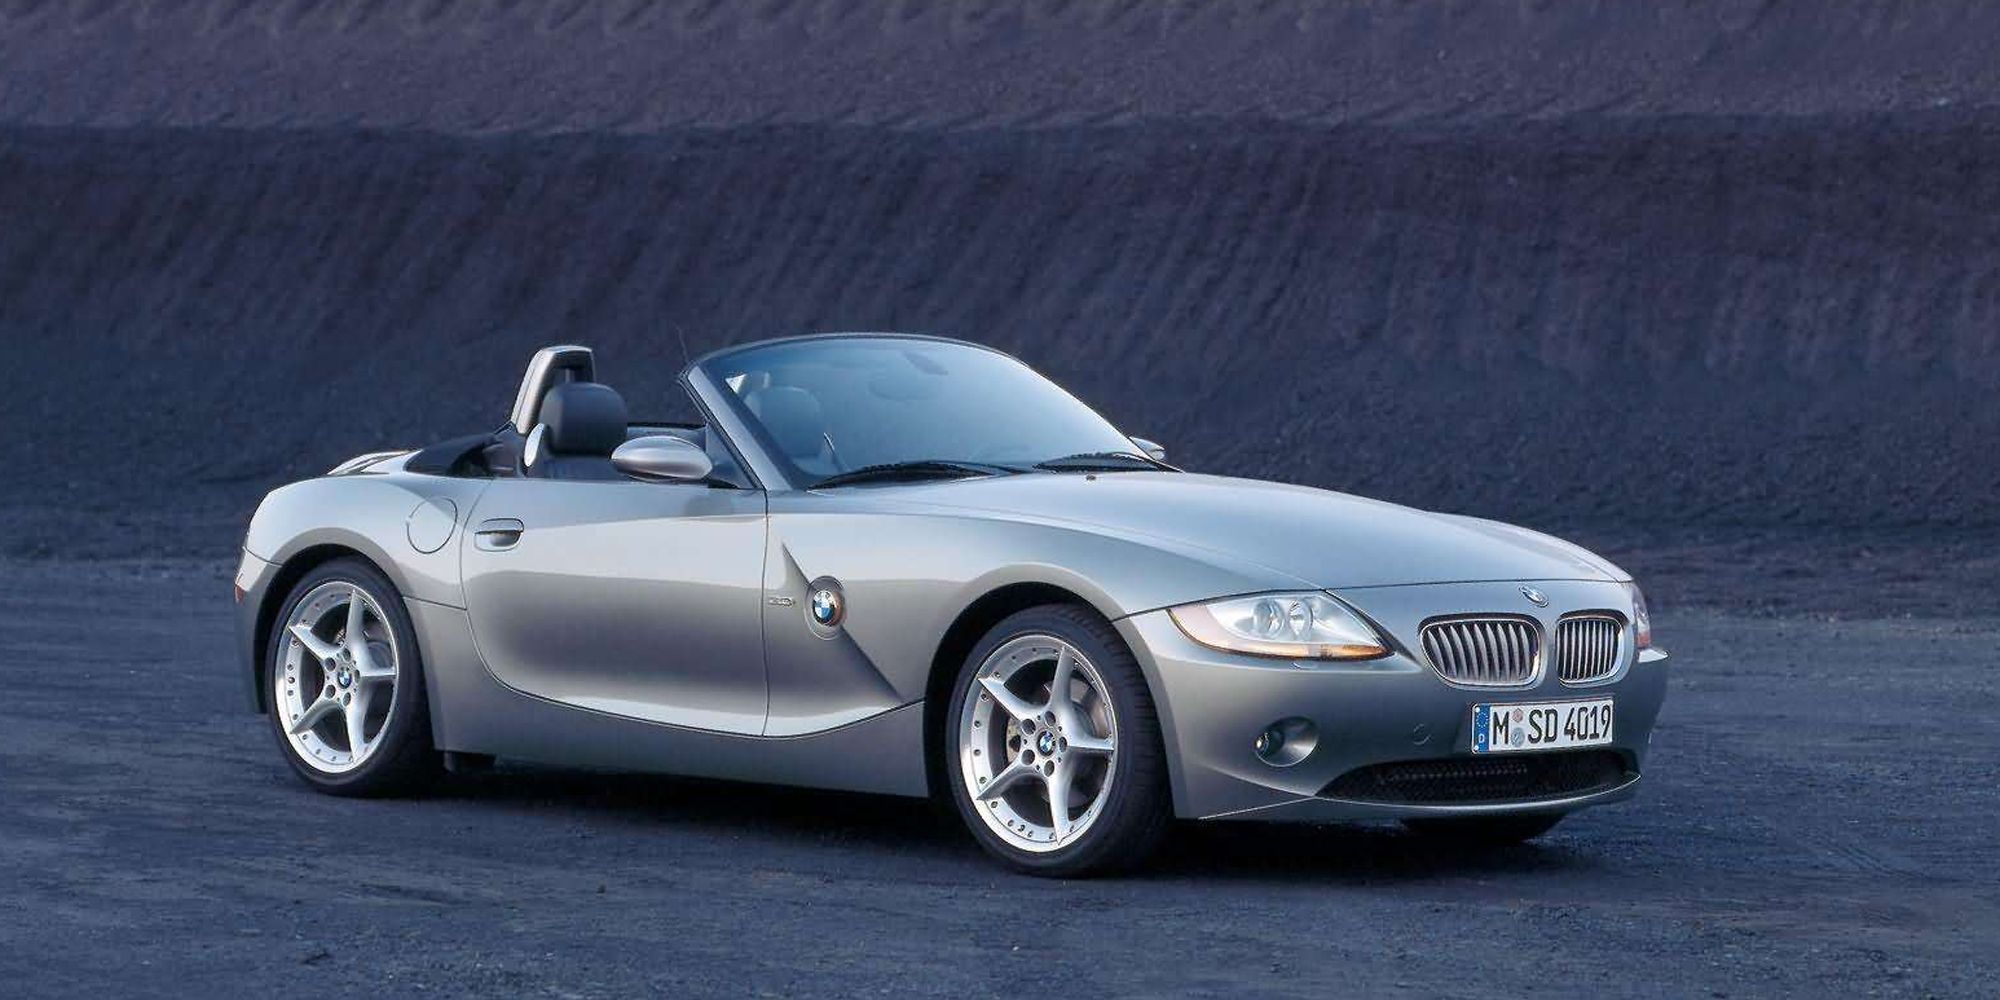 Front 3/4 view of a silver E85 BMW Z4